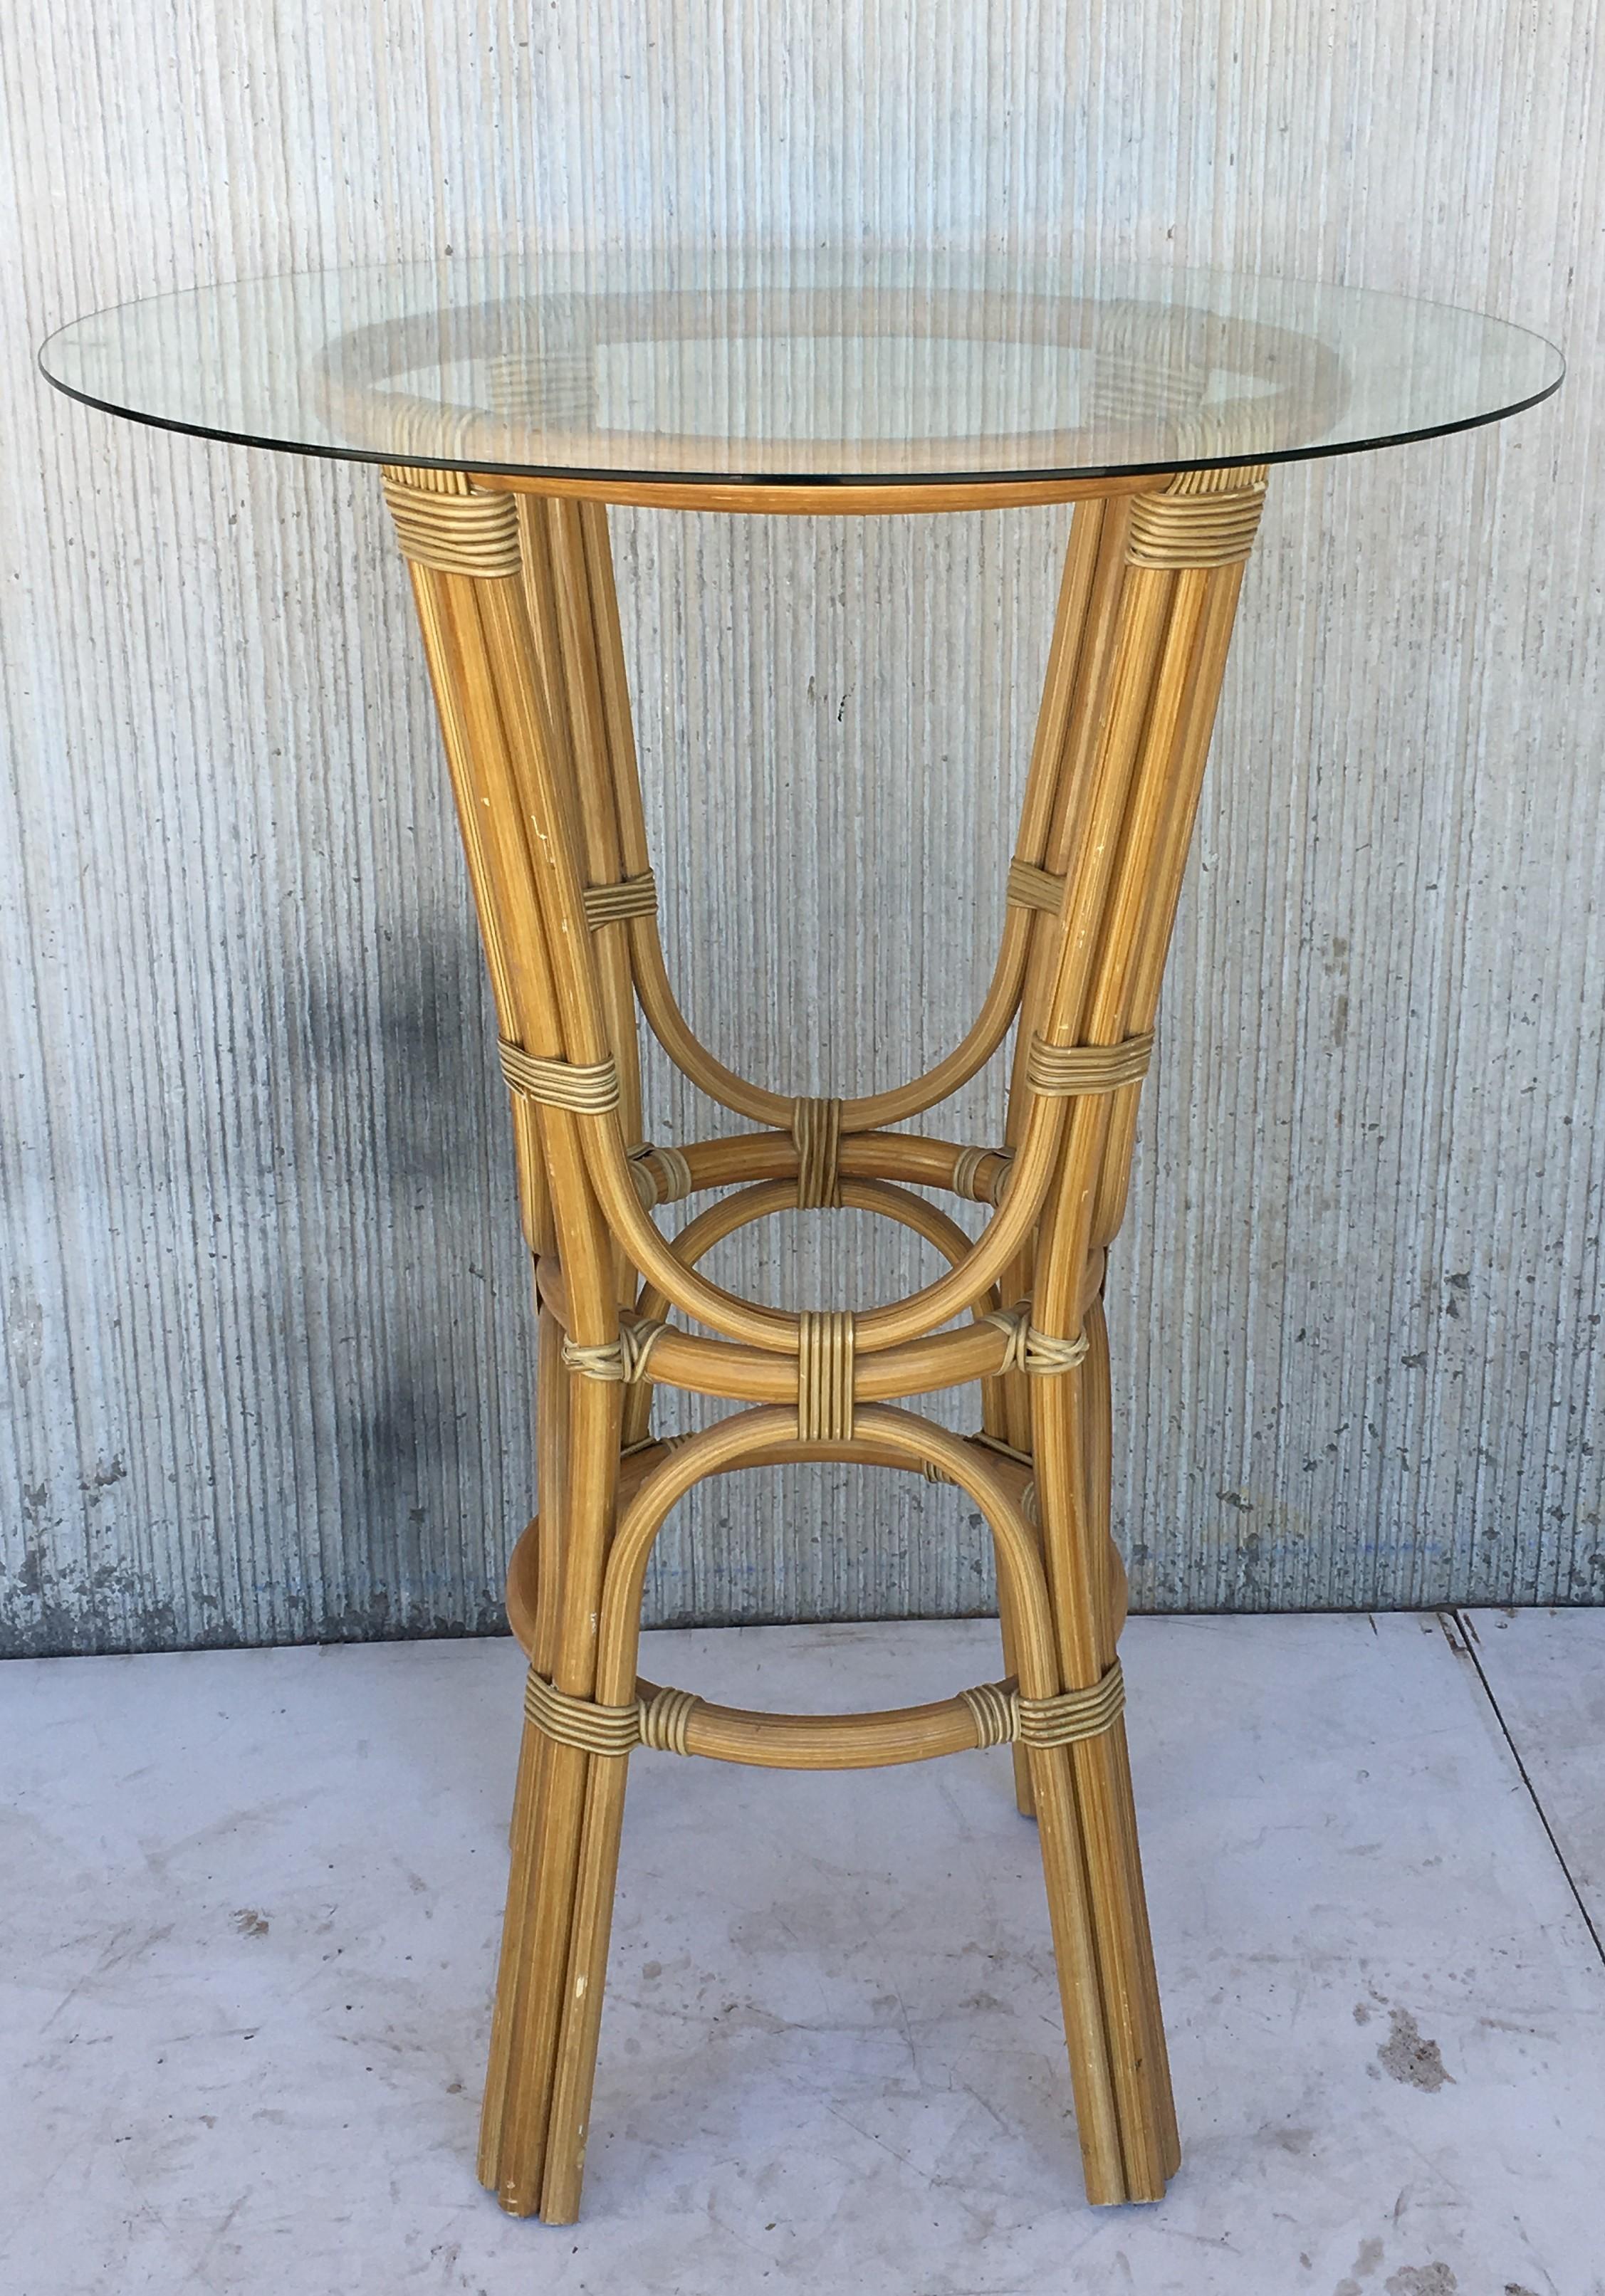 20th Century High Round Cocktail Table in Faux Bamboo with Glass Top